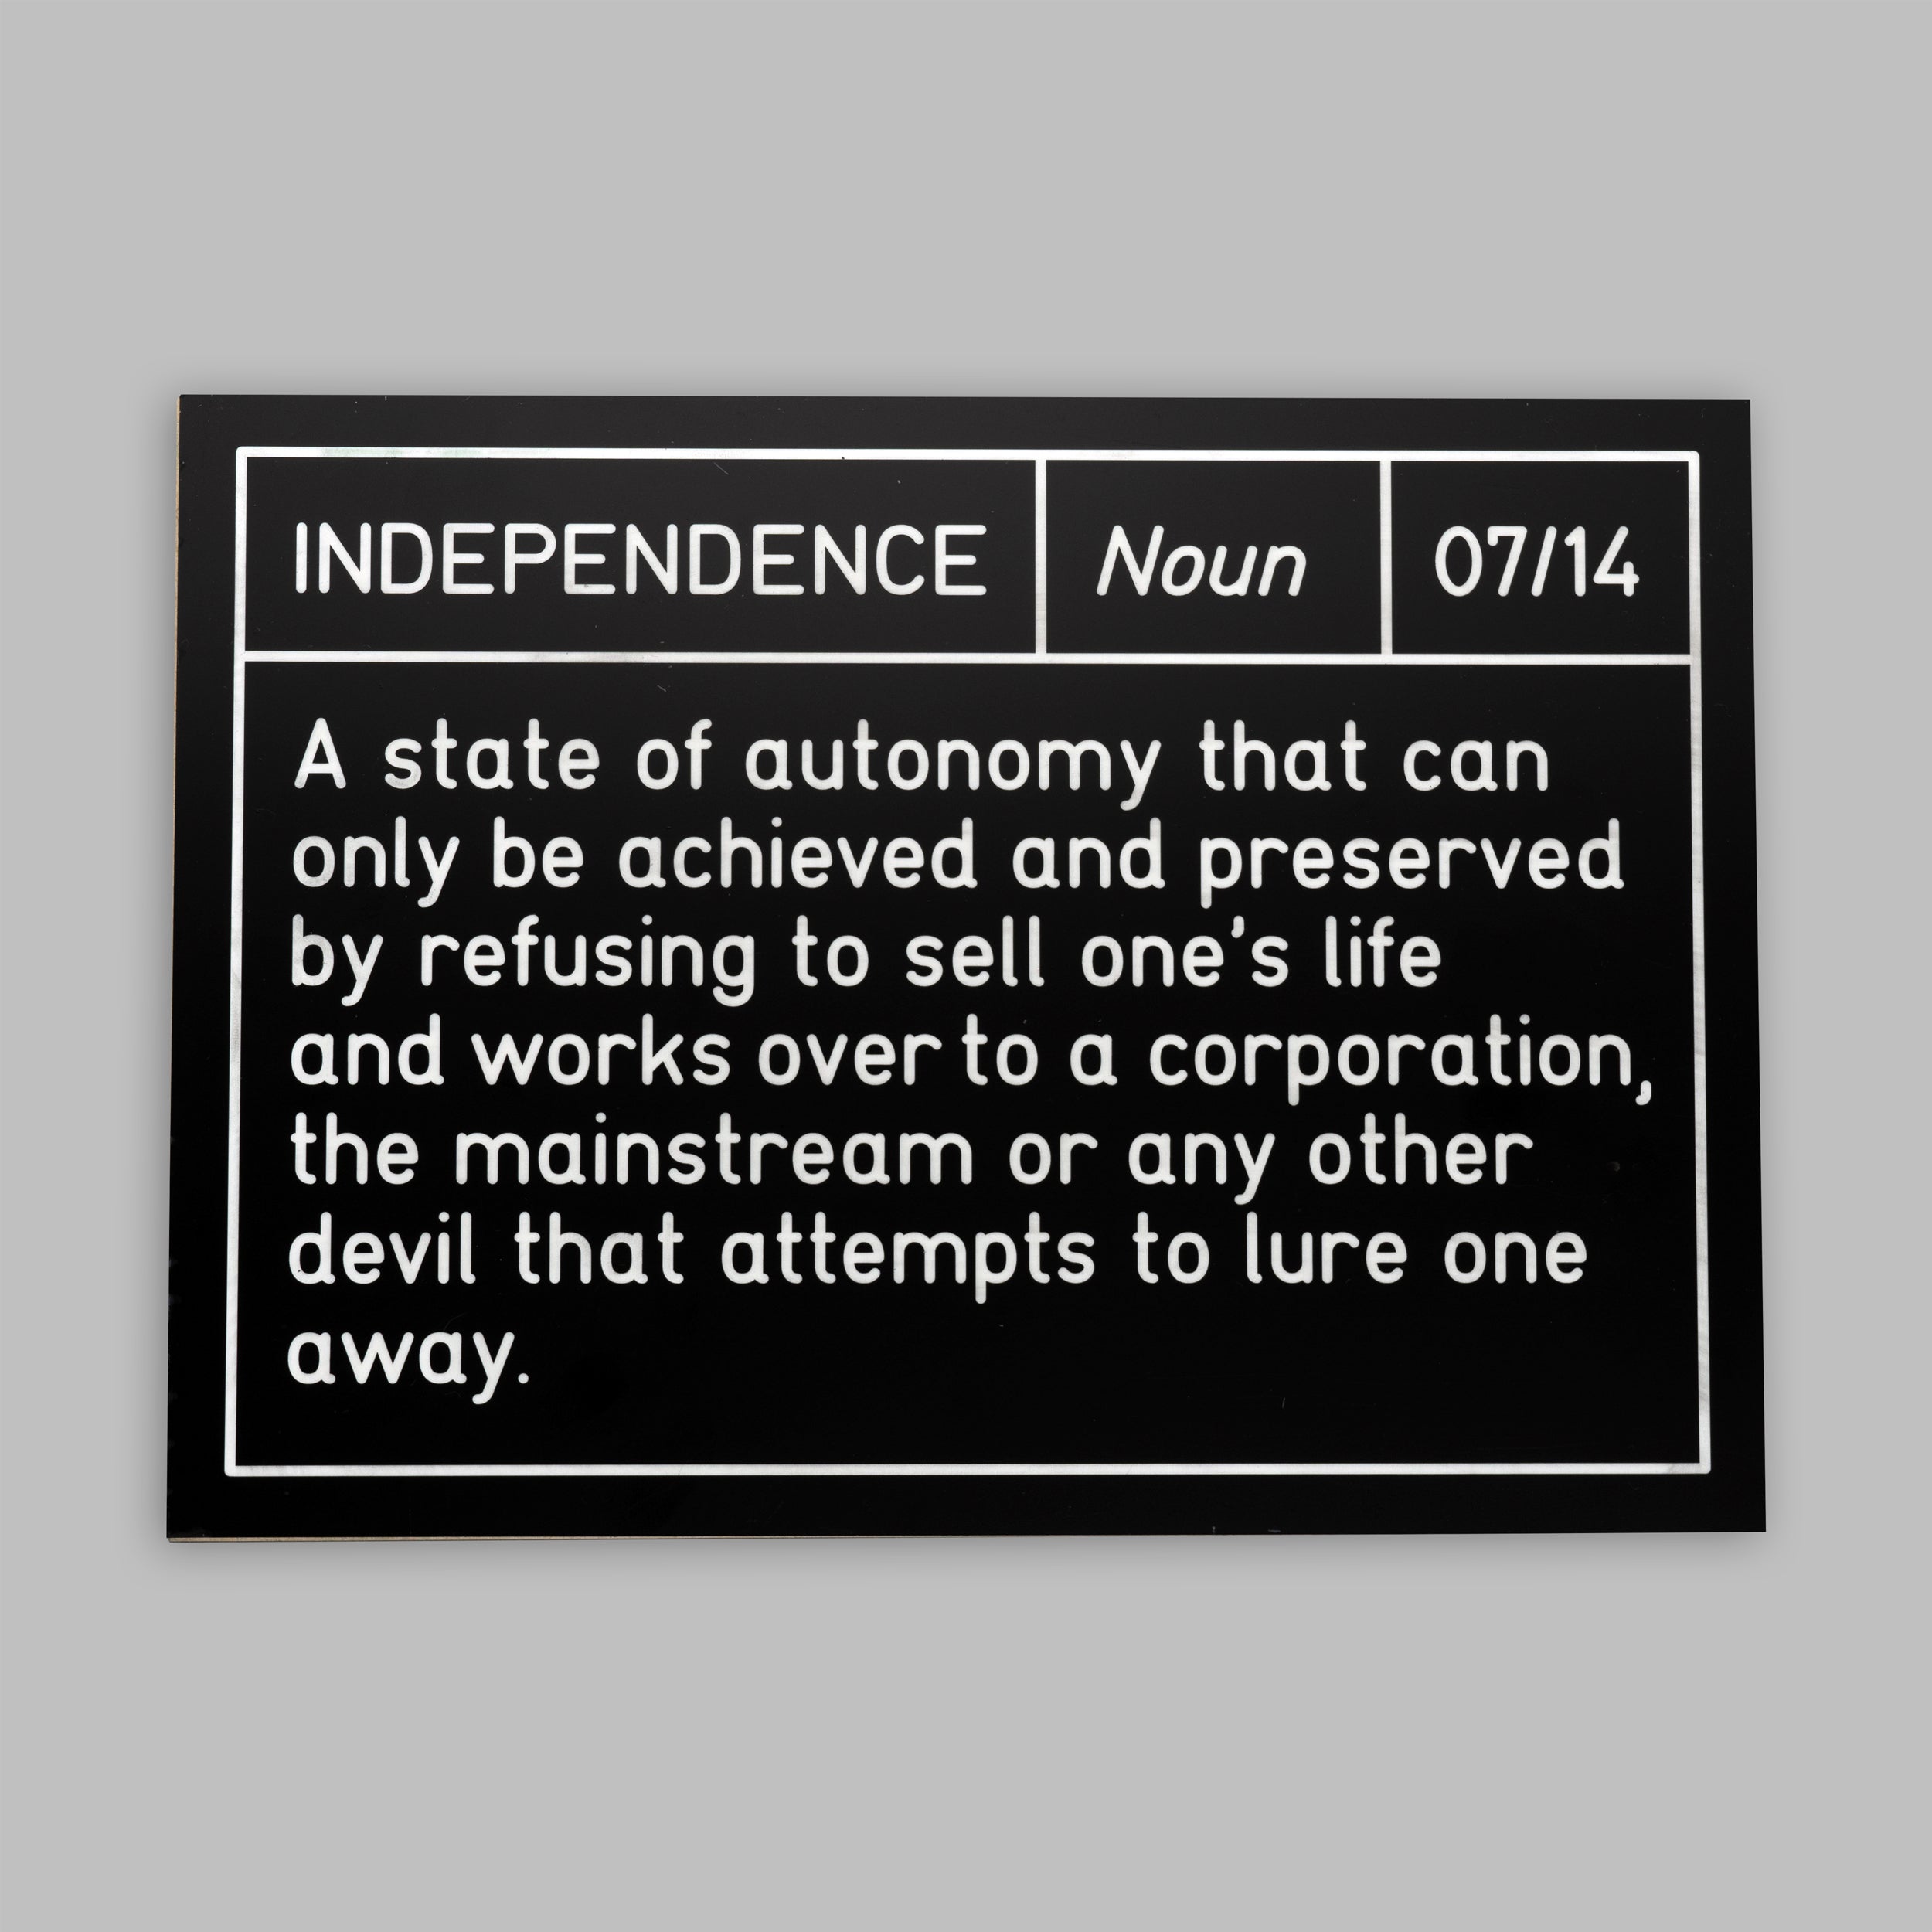 Independence - Sign 07/14